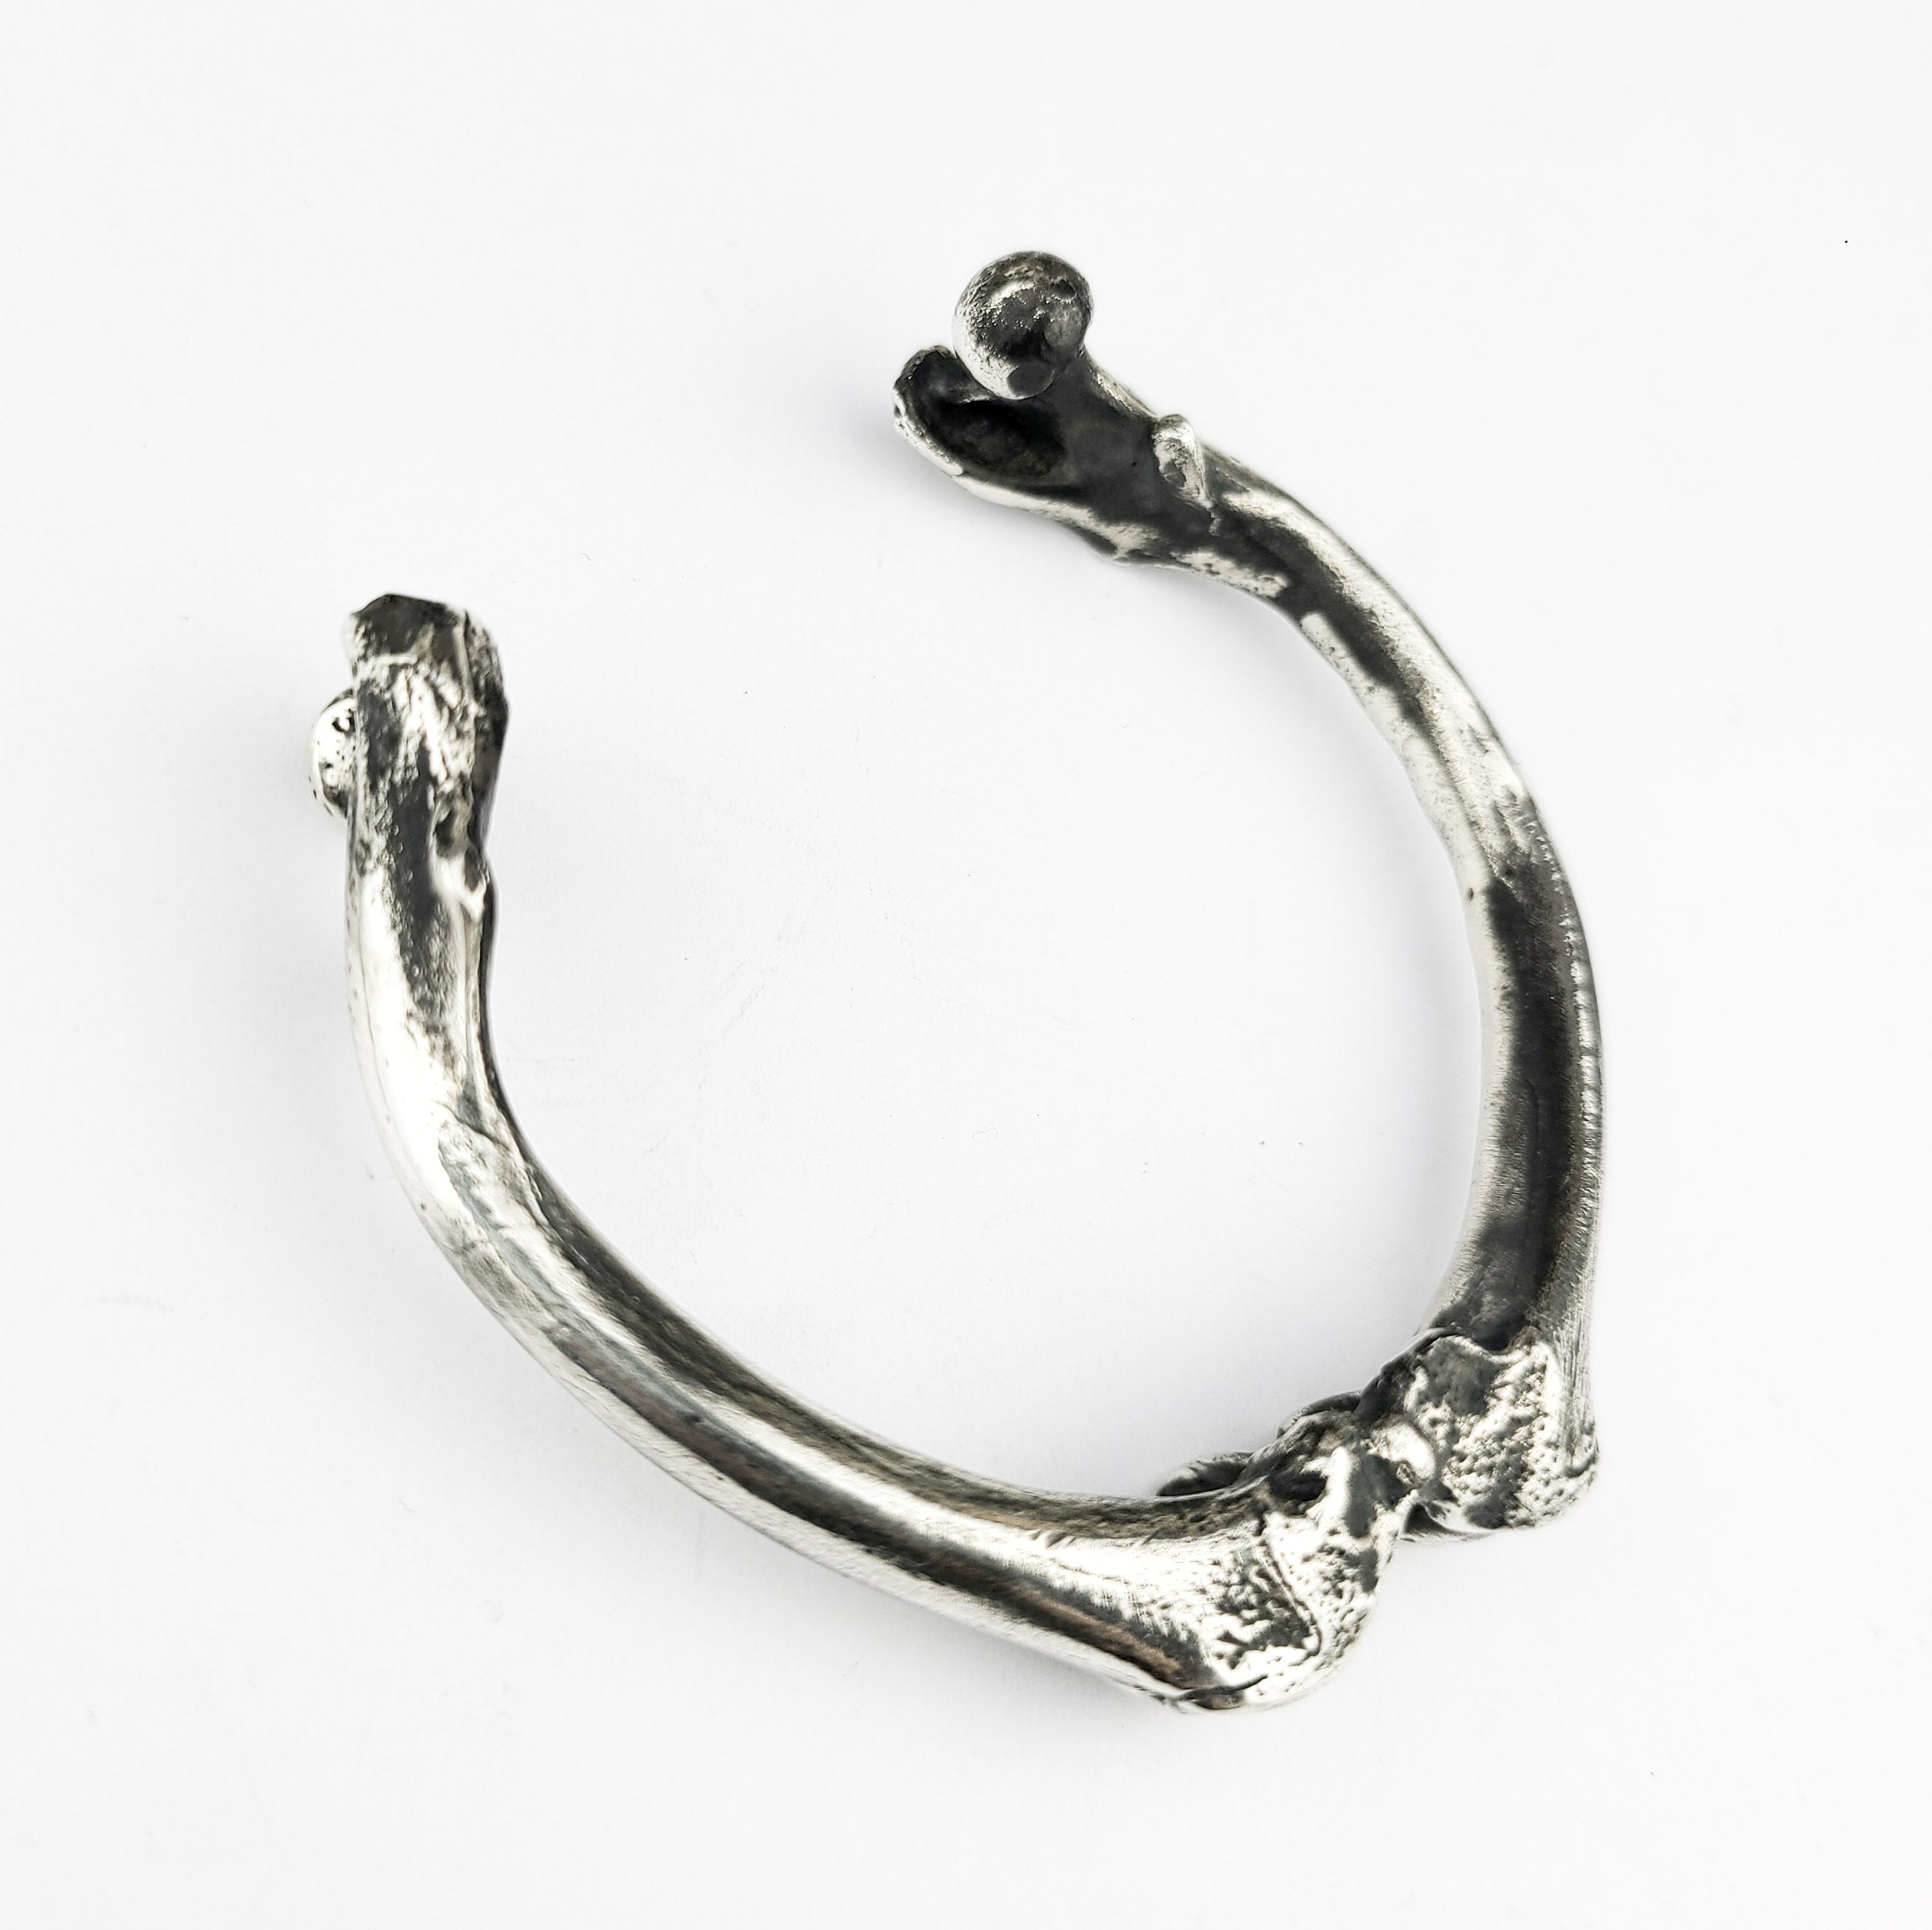 Men's or women's silver twisted cuff bracelet, at a discount price